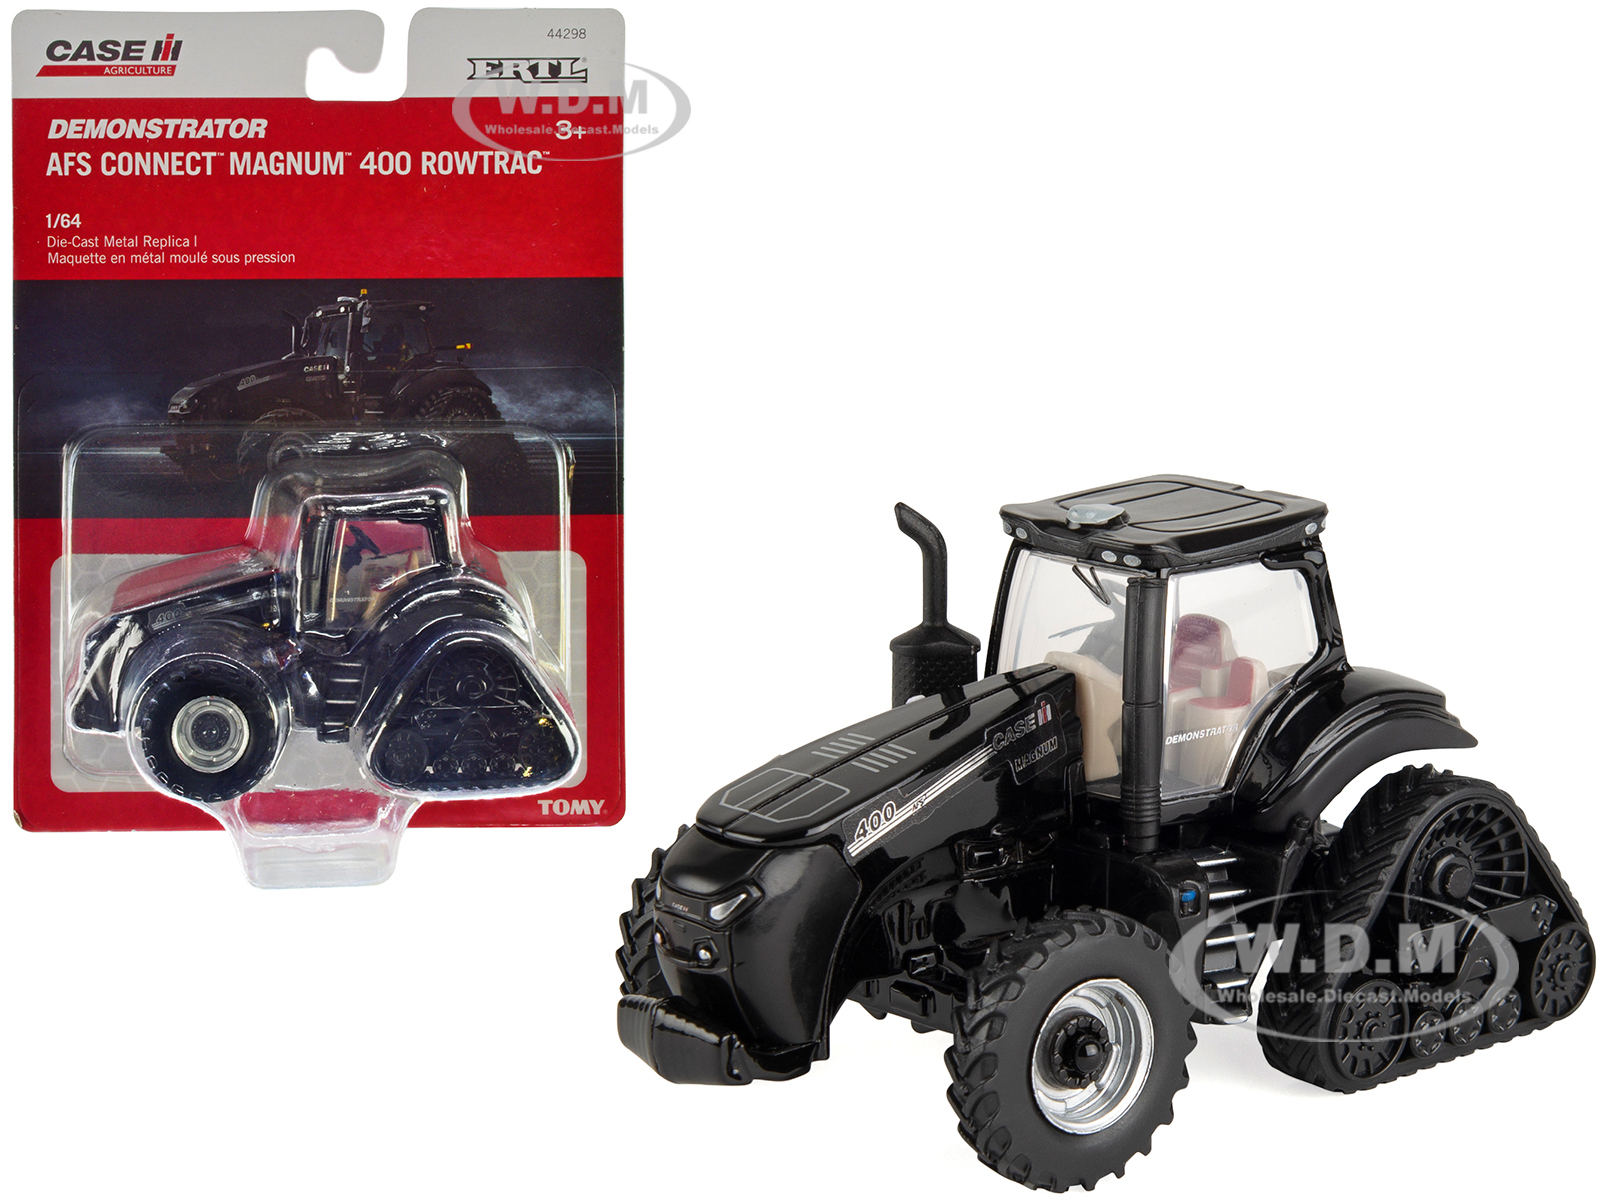 Case IH AFS Connect Magnum 400 RowTrac Demonstrator Half-Tracked Tractor Black Case IH Agriculture 1/64 Diecast Model By ERTL TOMY